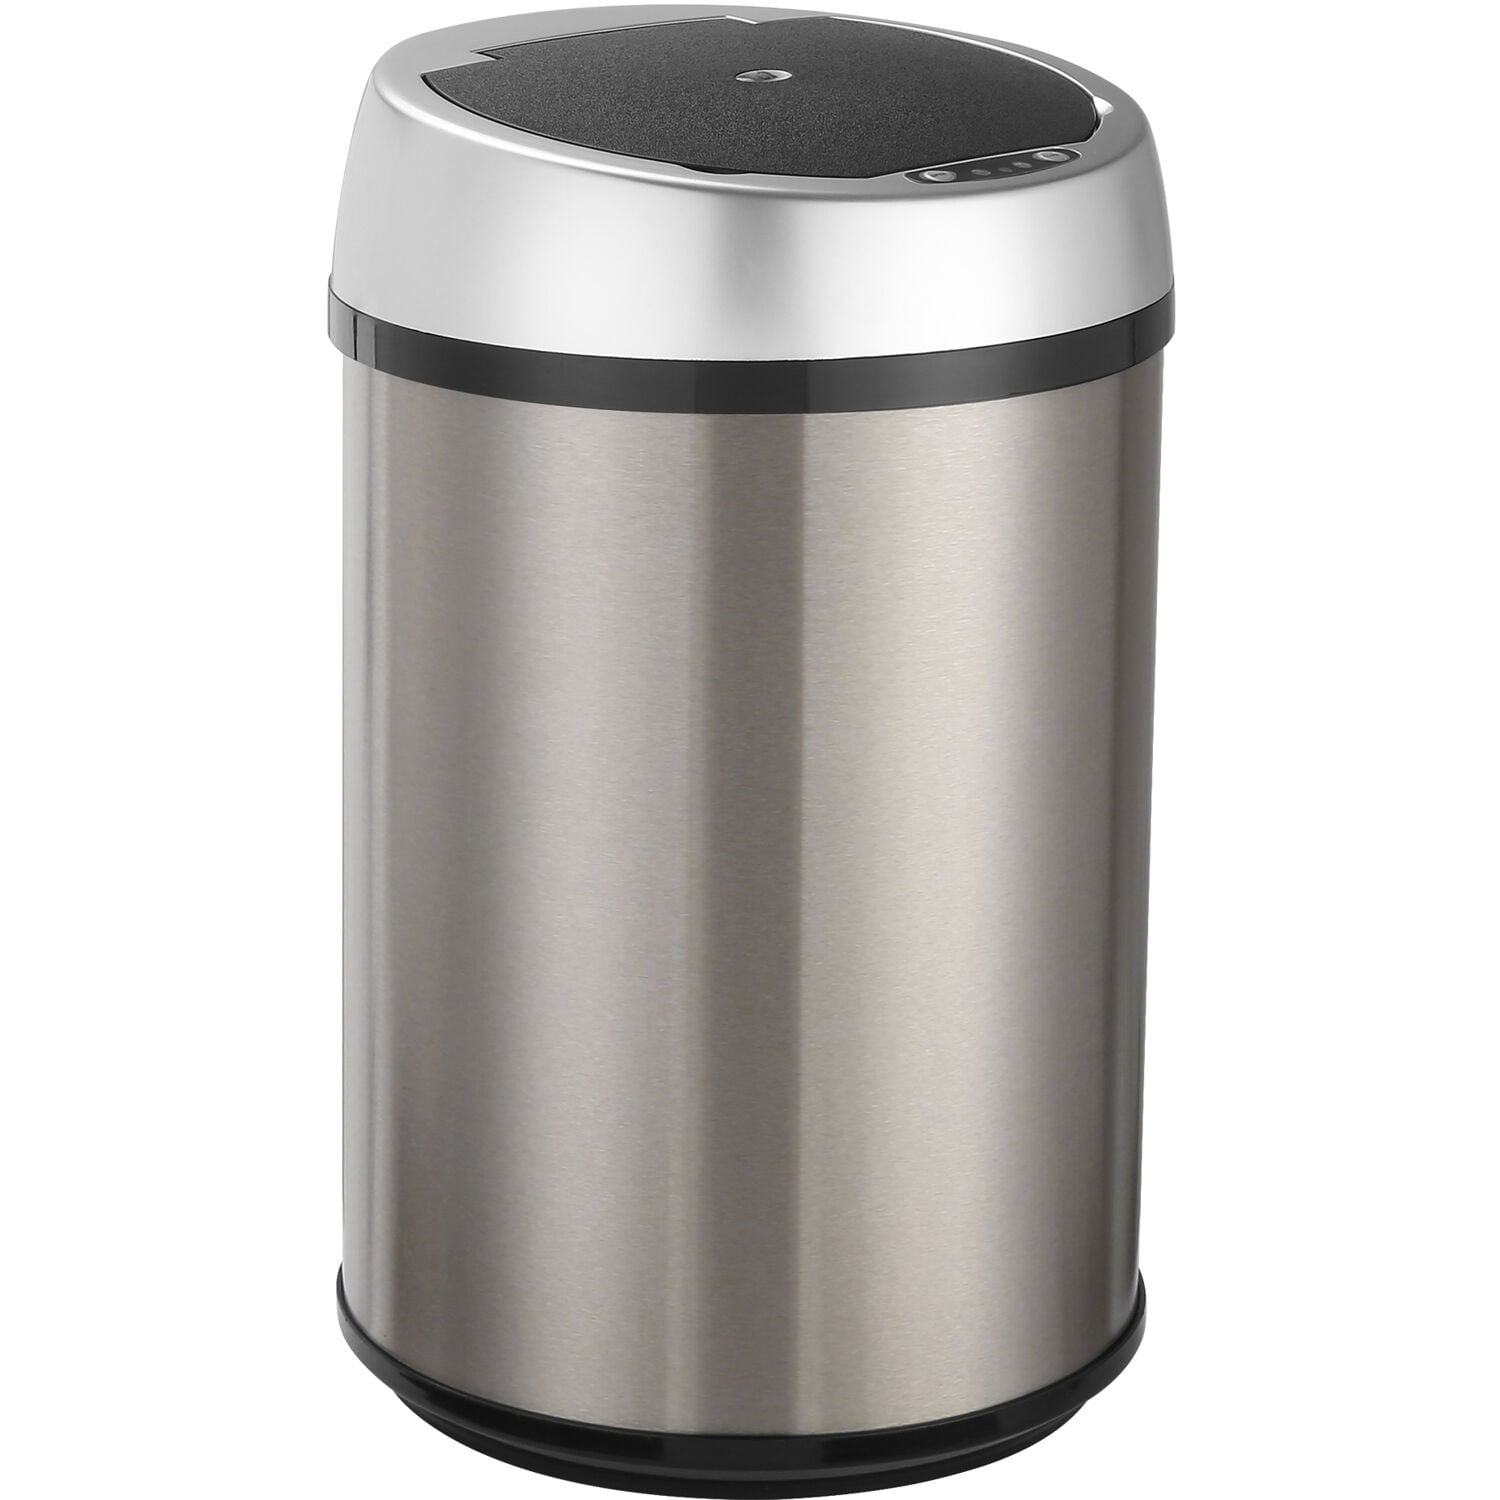 https://ak1.ostkcdn.com/images/products/is/images/direct/2cc17d895ac2cbbc88f4a99787149a5ae284faa8/Hanover-12-Liter---3.1-Gallon-Trash-Can-with-Sensor-Lid-in-Stainless-Steel.jpg